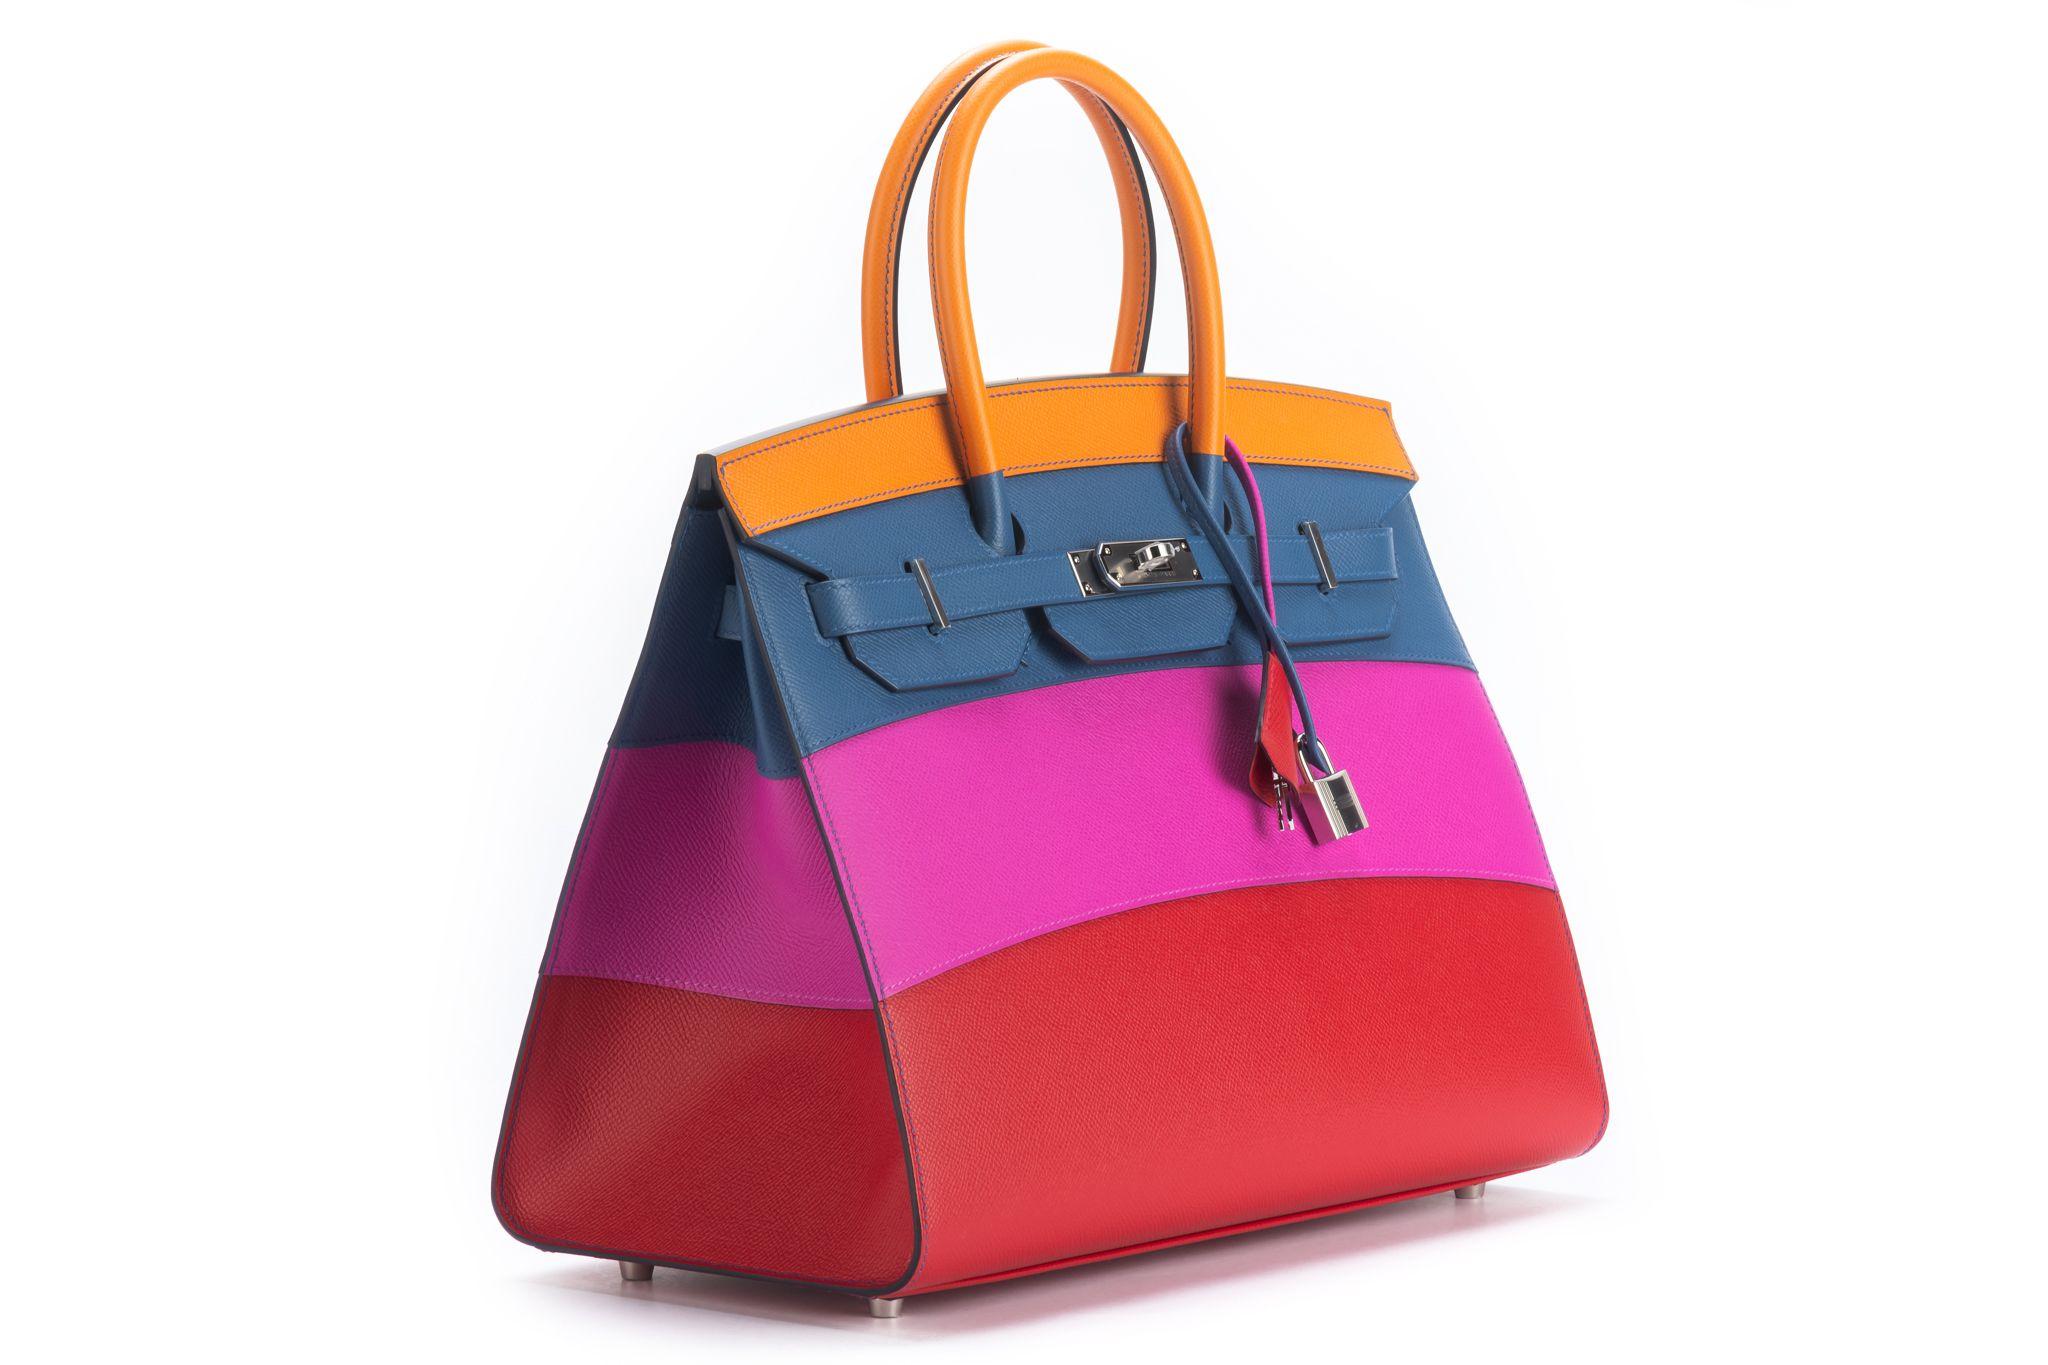 BNIB Hermes 35 Birkin Sellier bag featured in Sunset Rainbow limited edition. The applique-stitch technique gives the effect of a rainbow casting the warm glow of sunset hues. Abricot, Blue Agate, Magnolia and Rouge Casaque. Epsom leather and